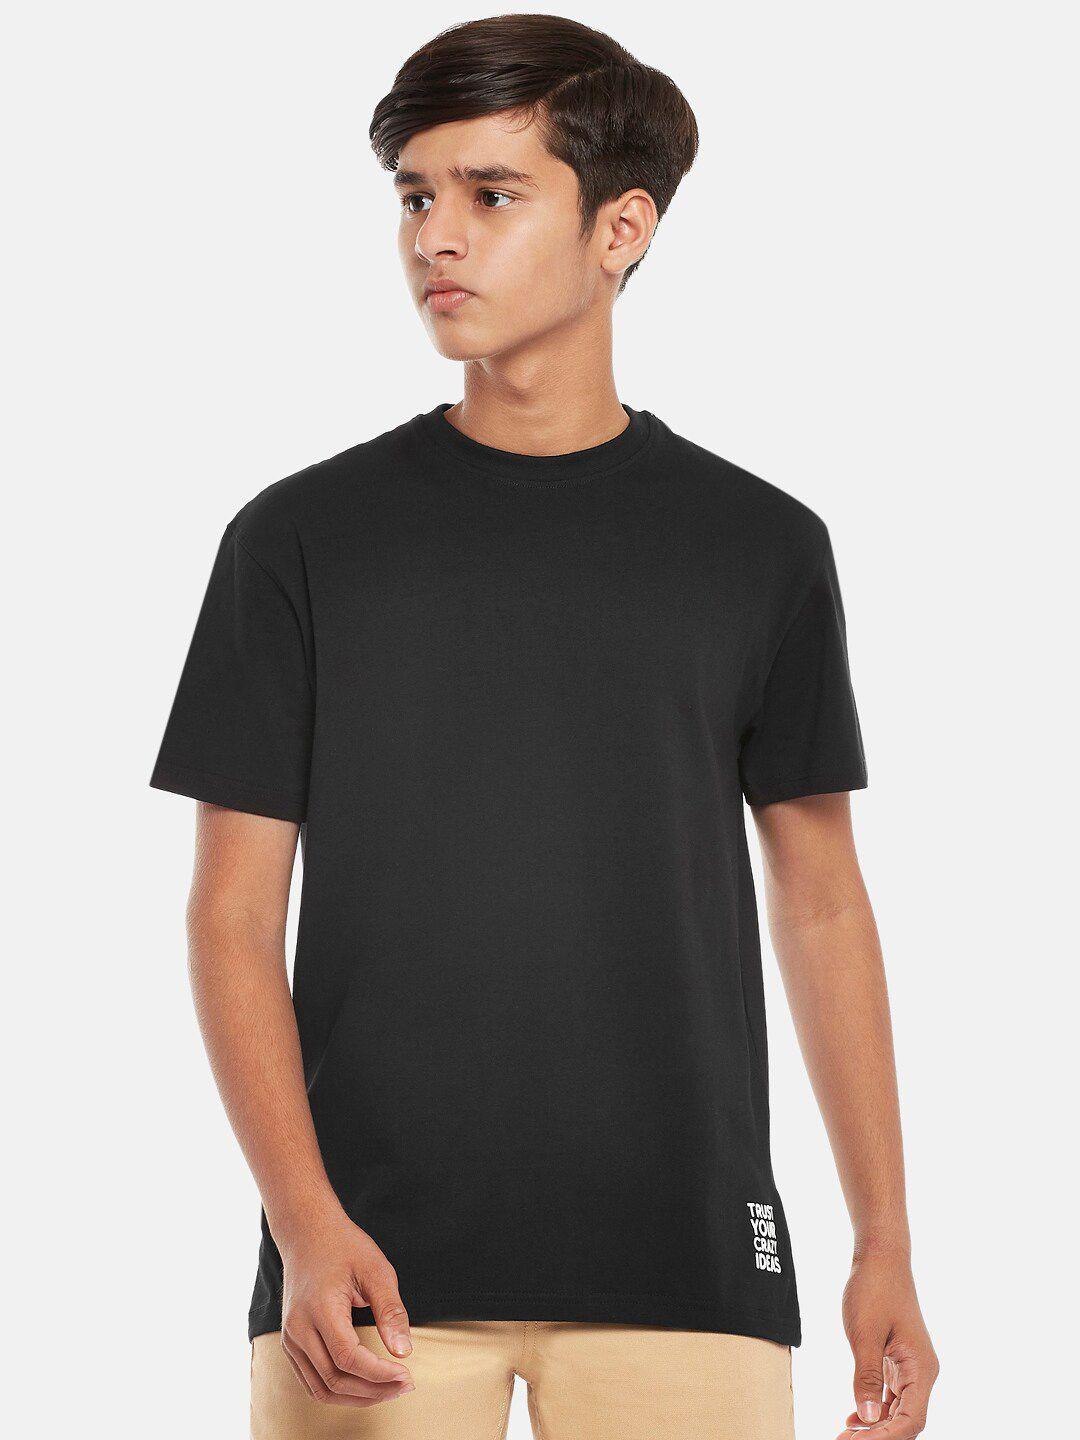 coolsters by pantaloons boys black solid cotton t-shirt